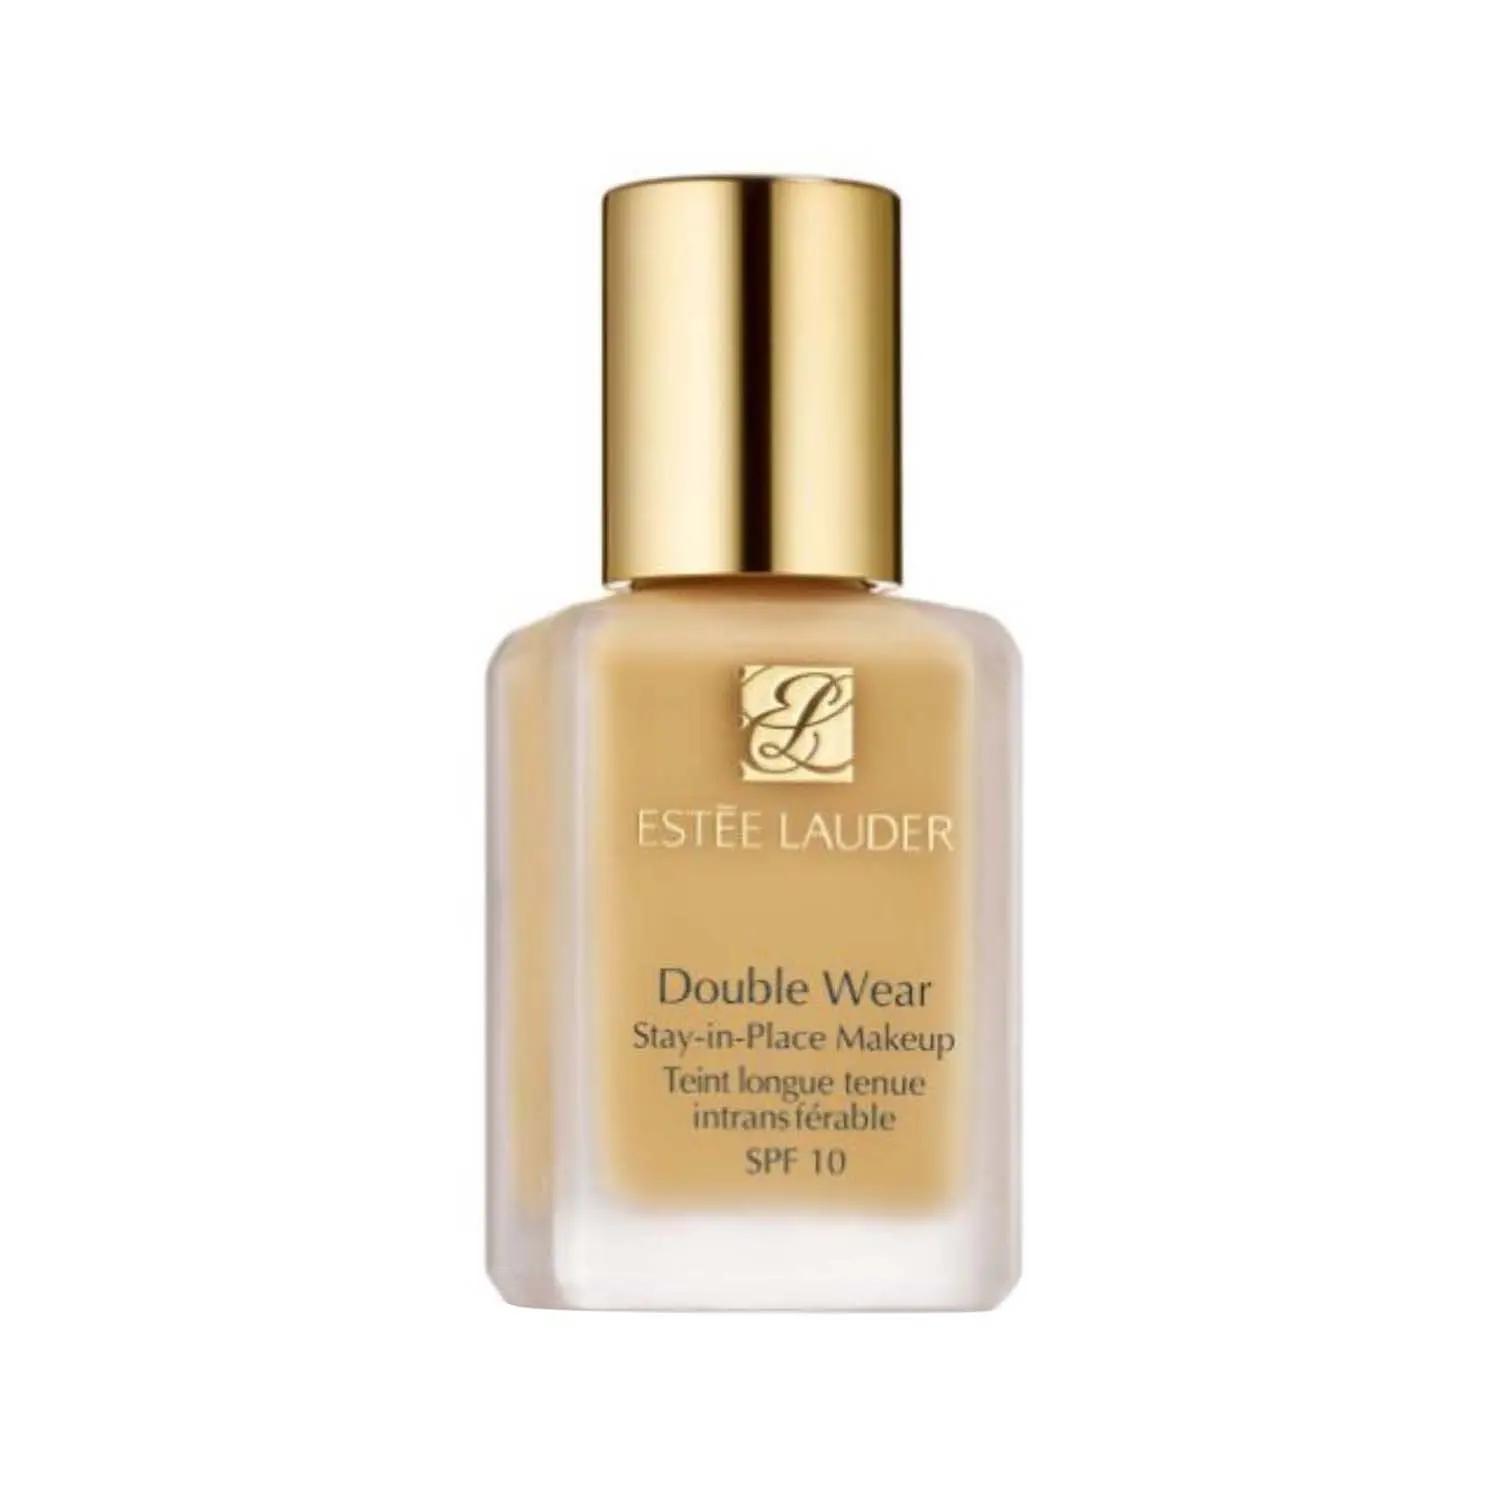 estee lauder double wear stay-in-place makeup foundation spf 10 - 2w2 rattan (30ml)